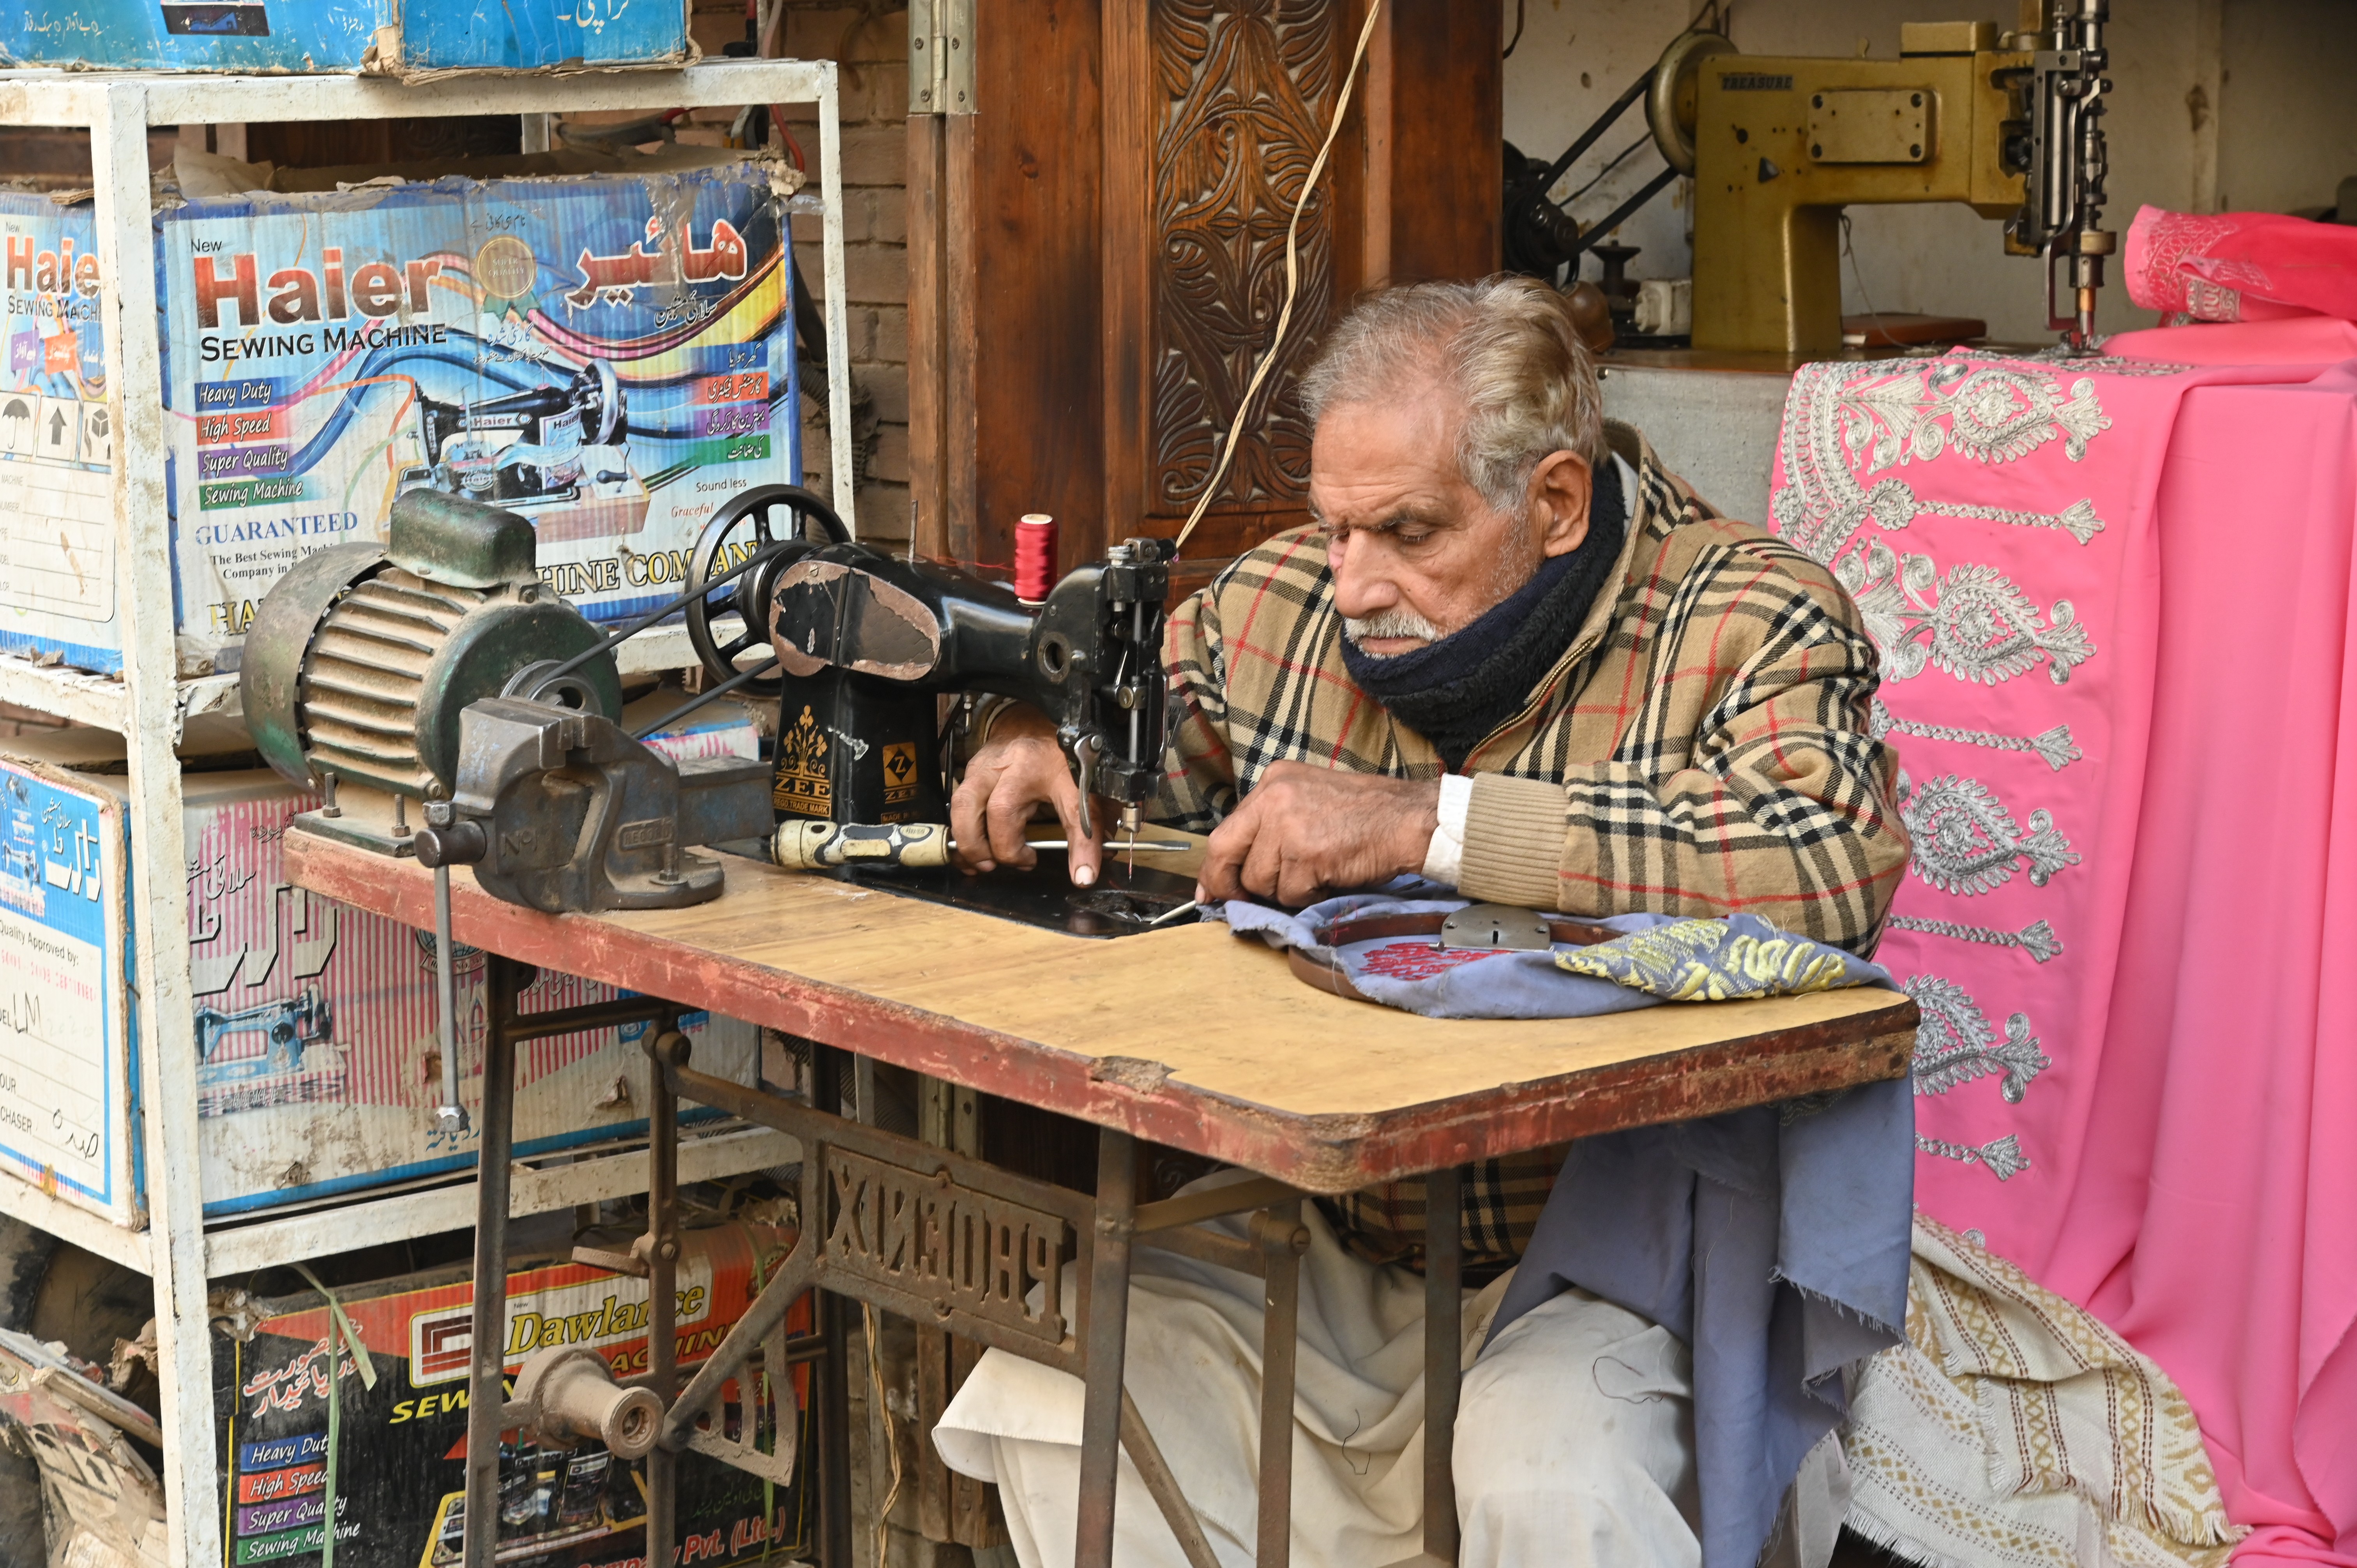 A man busy in stitching the cloths